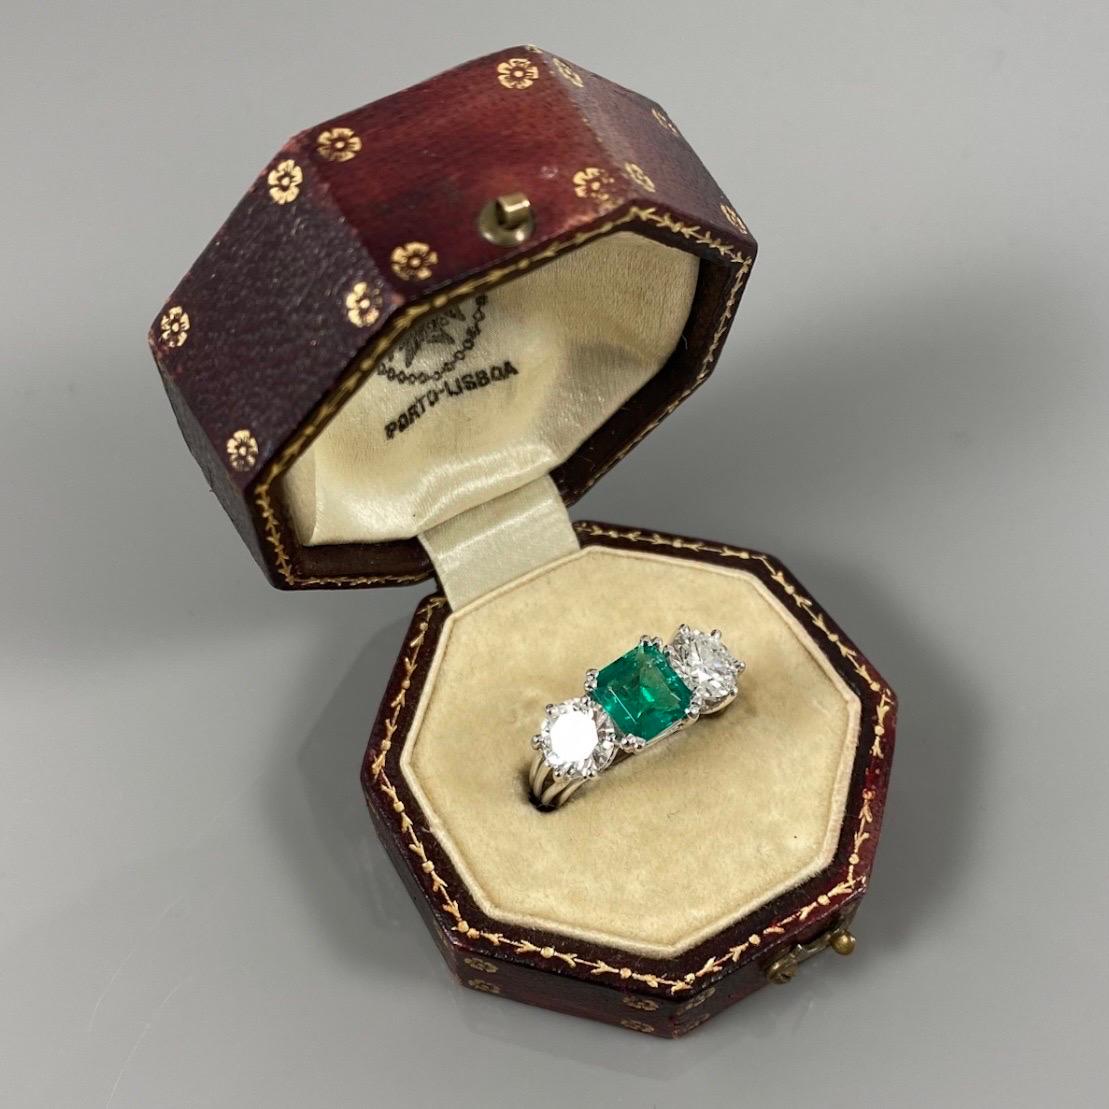 Mid-Century certified Colombian emerald and diamond three-stone engagement ring in platinum, Portuguese, 1950s/1960s, Cased. This ring features an octagonal-cut emerald of a vivid green color claw-set to the center, flanked on each side by a